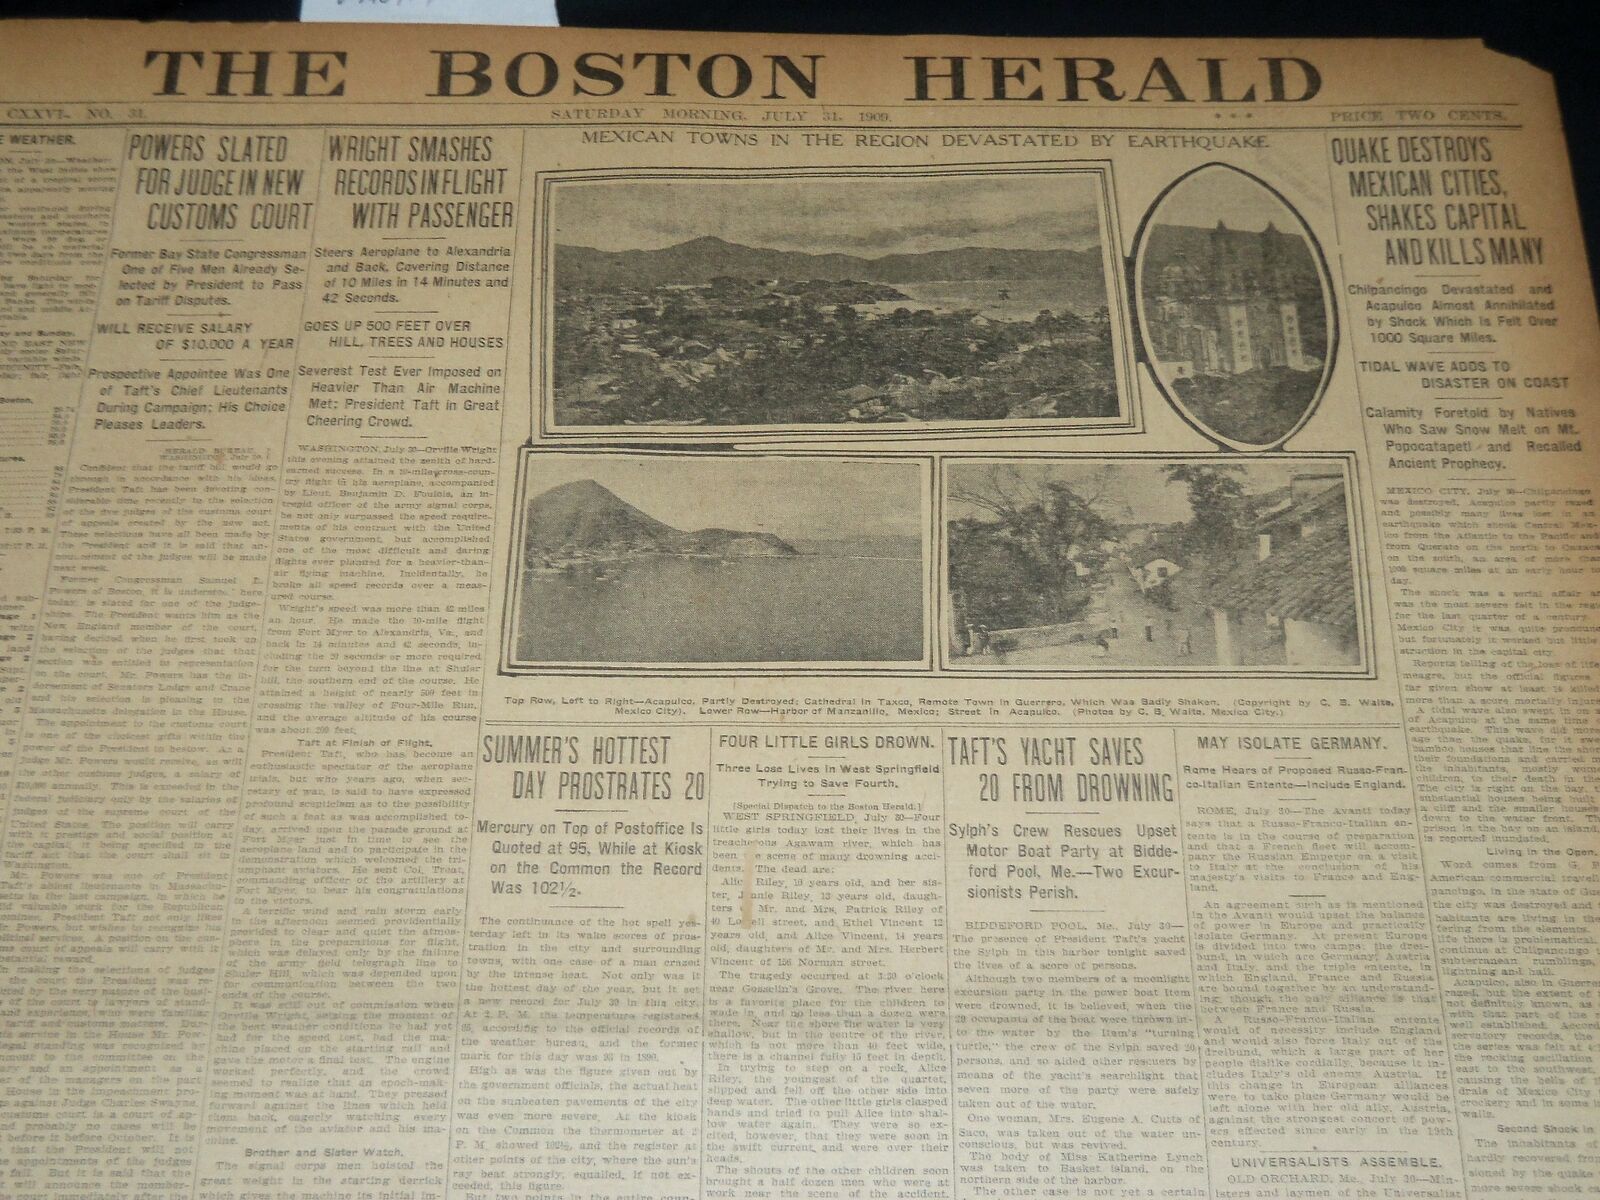 1909 JULY 31 THE BOSTON HERALD - WRIGHT SMASHES RECORDS IN FLIGHT - BH 212